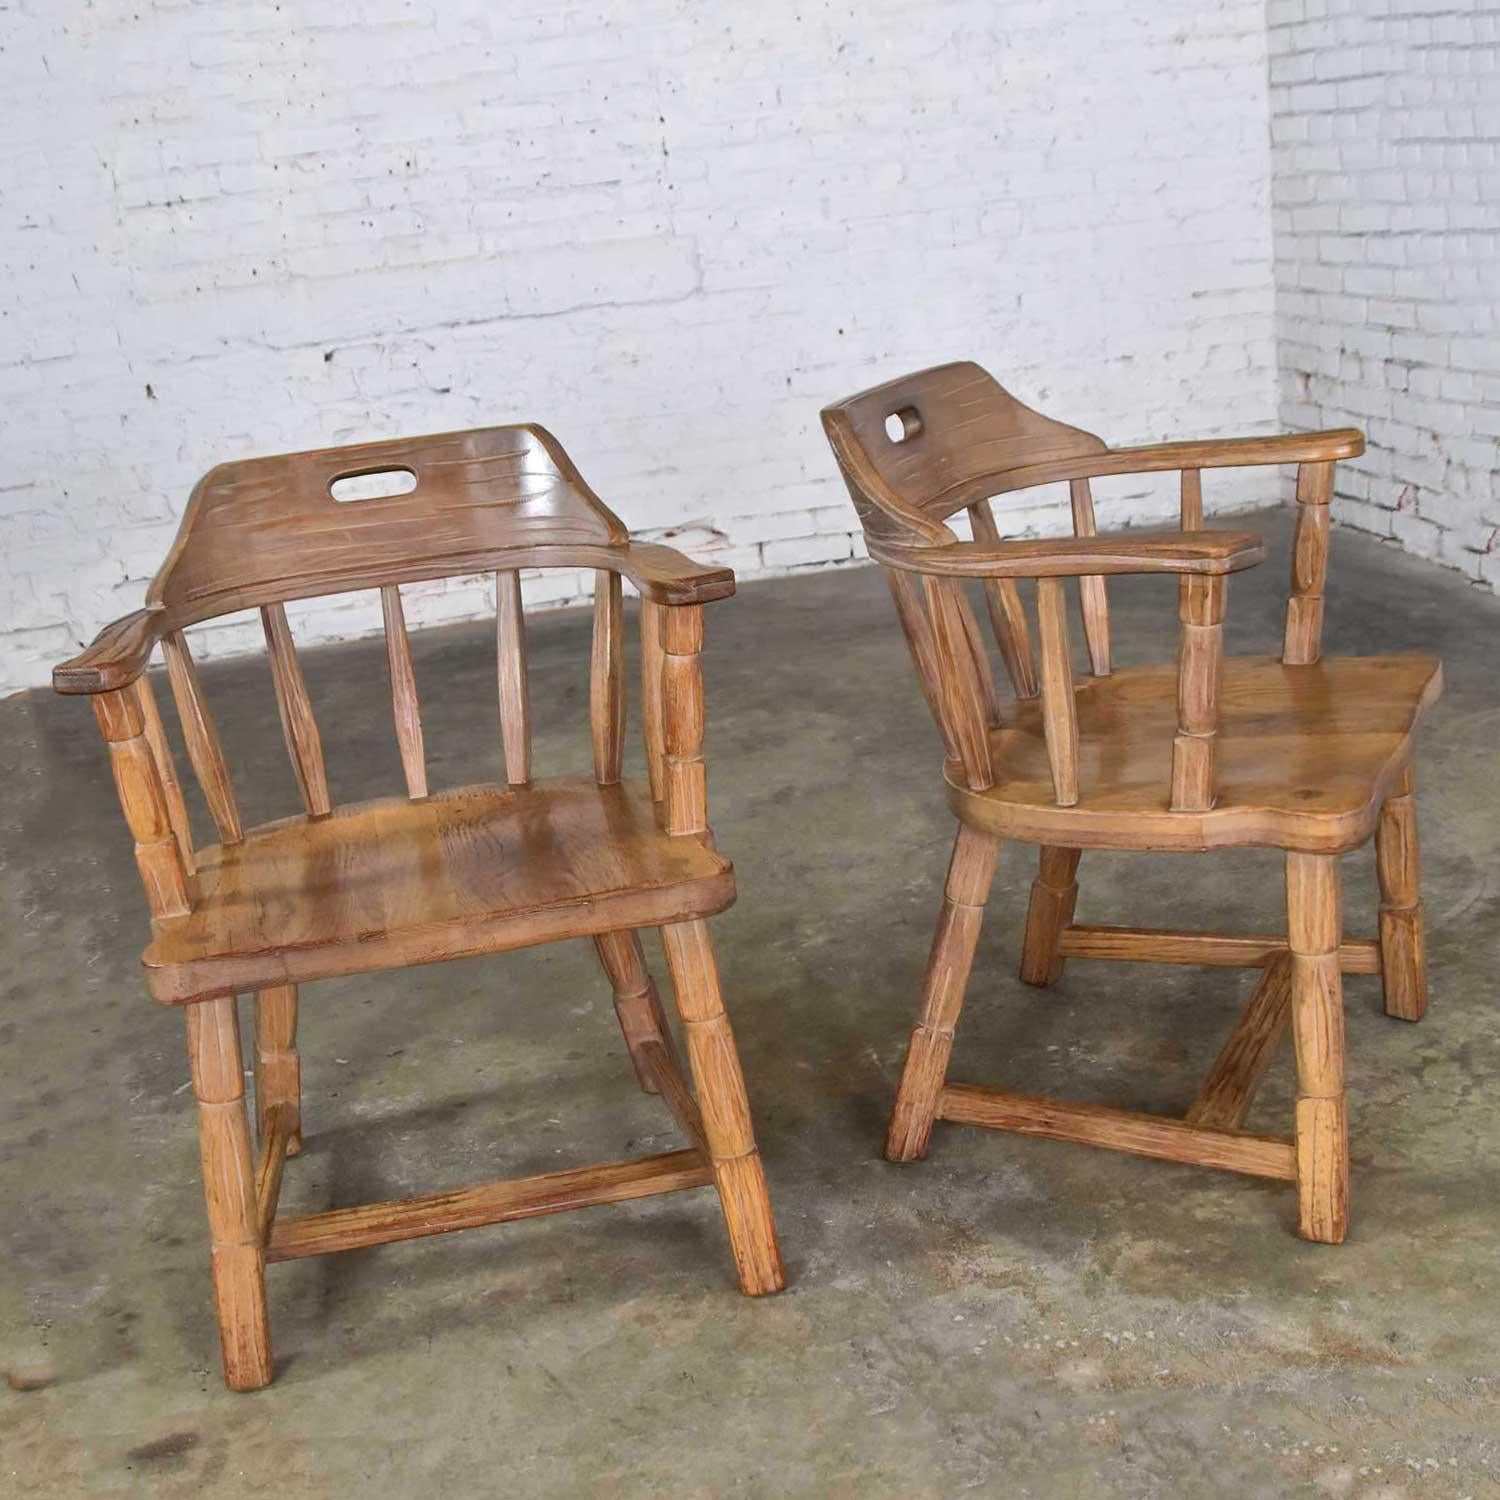 Wonderful pair of captains’ armchairs by A. Brandt comprised of solid ranch oak with natural oak finish. Gorgeous vintage condition with no outstanding flaws. Please see photos, circa mid-20th century.

Just look at these wonderful Captain’s